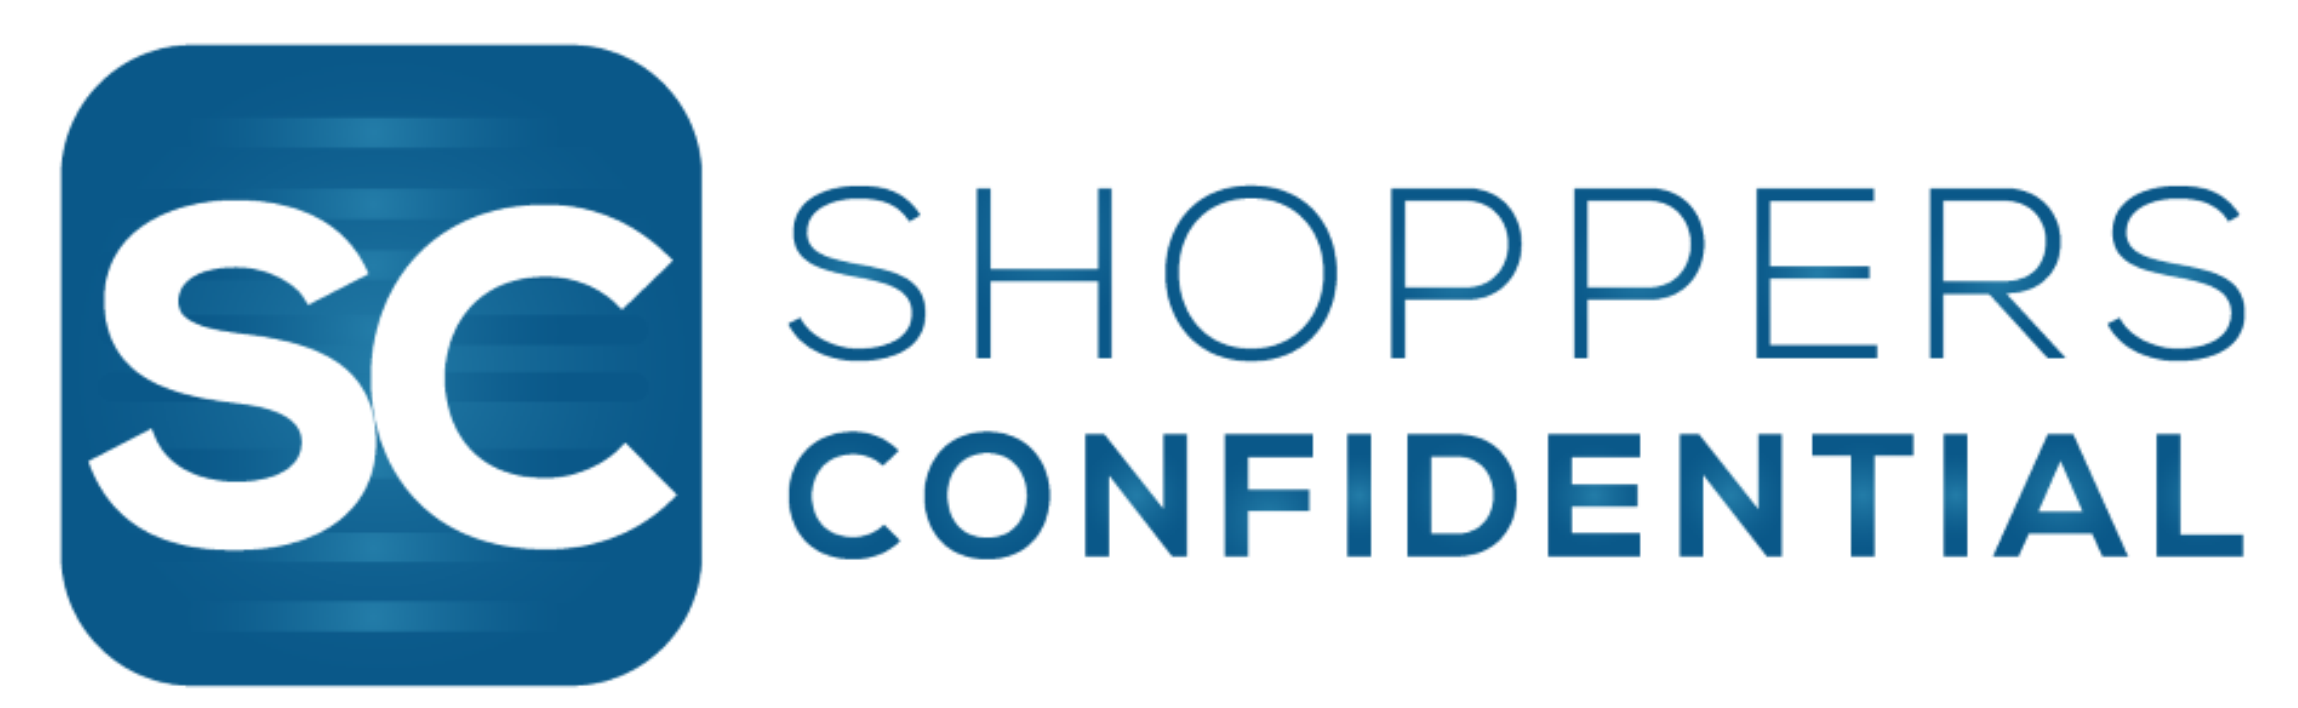 Shoppers Confidential